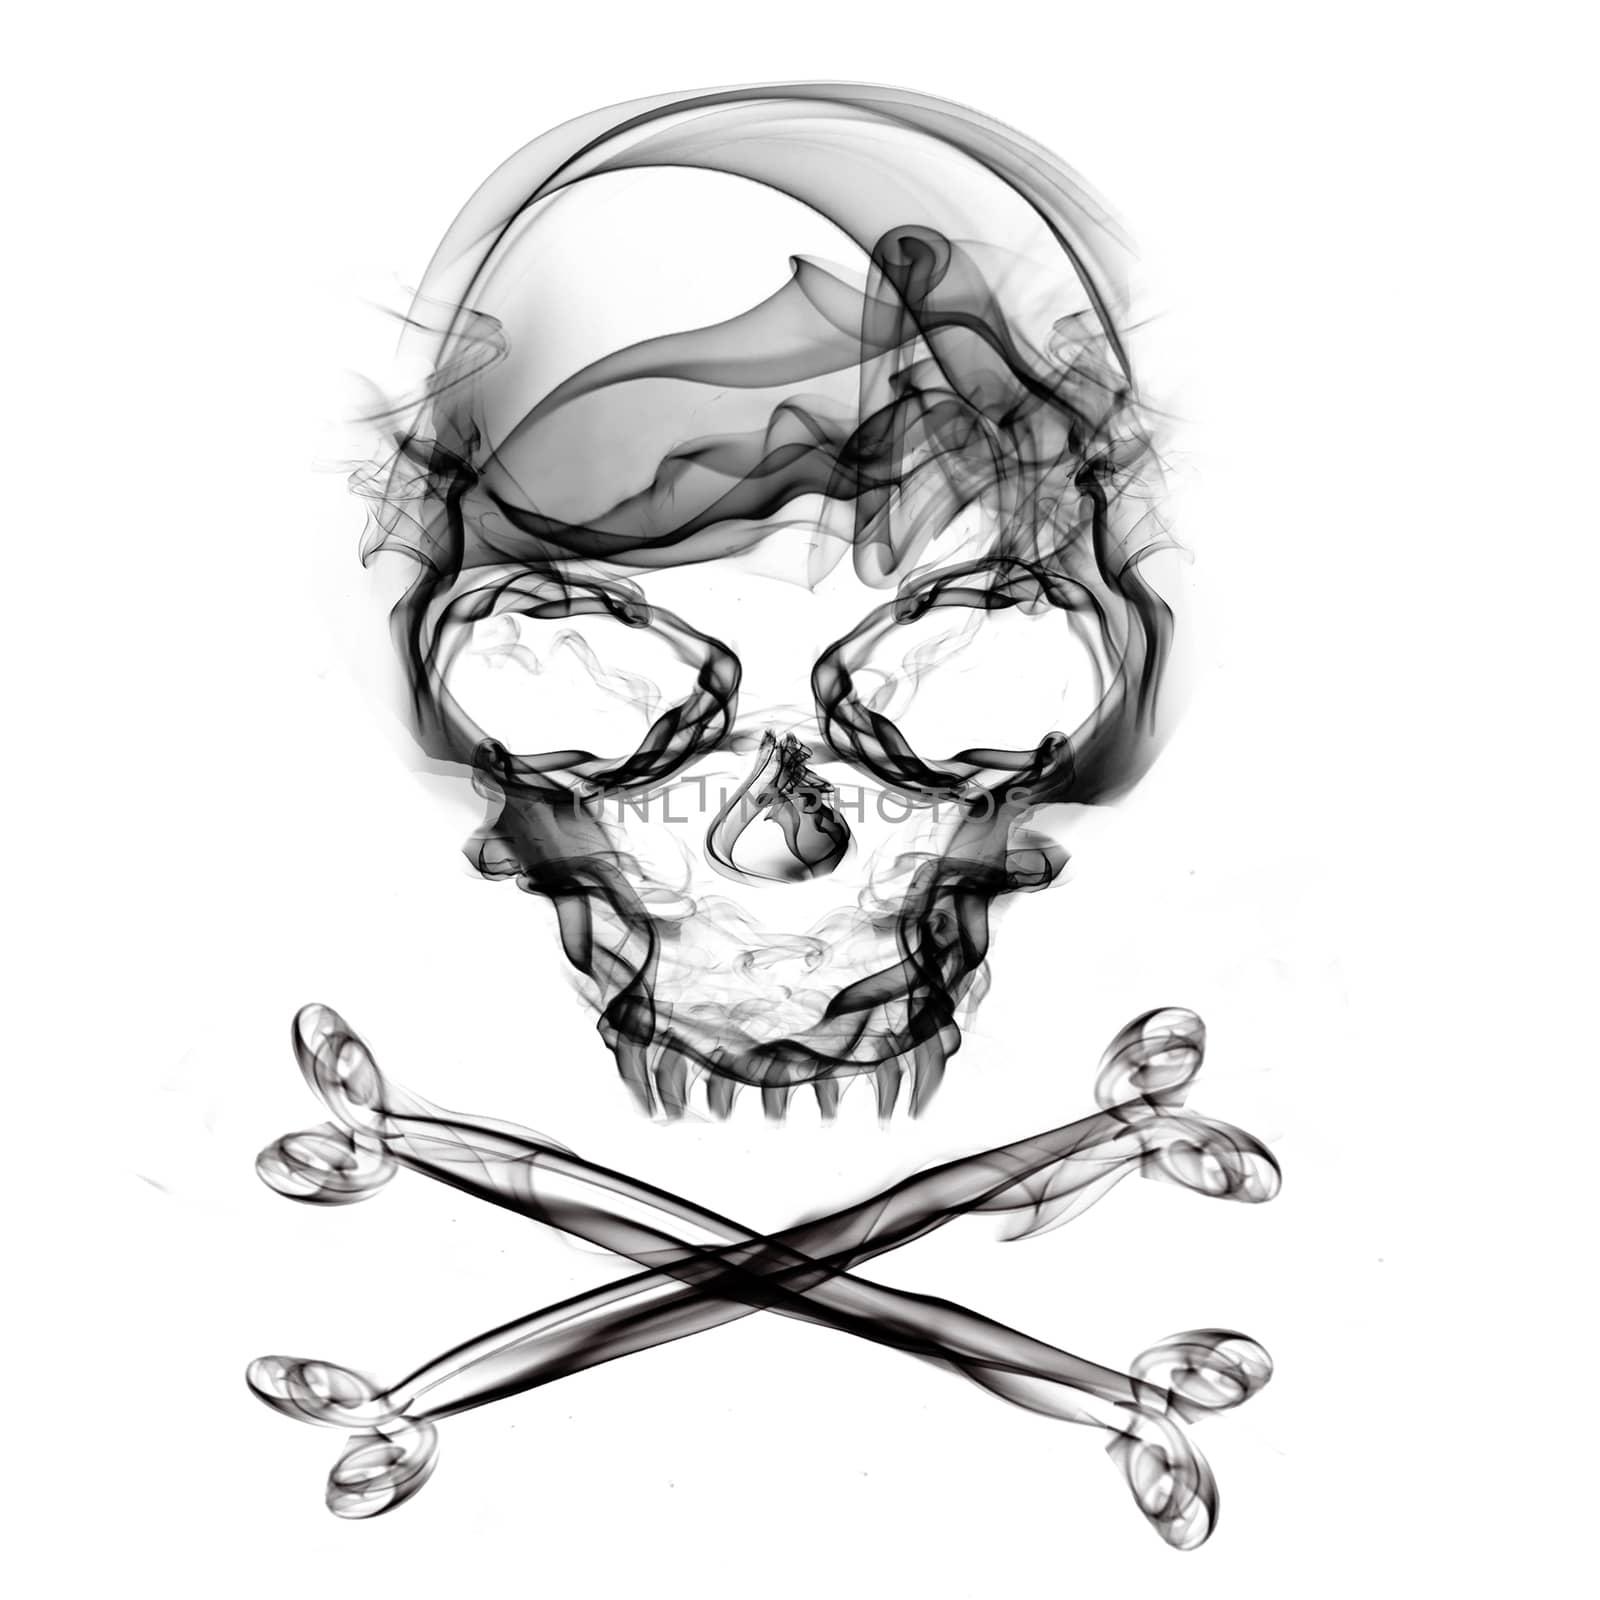 pirate skull isolated on white background by sette